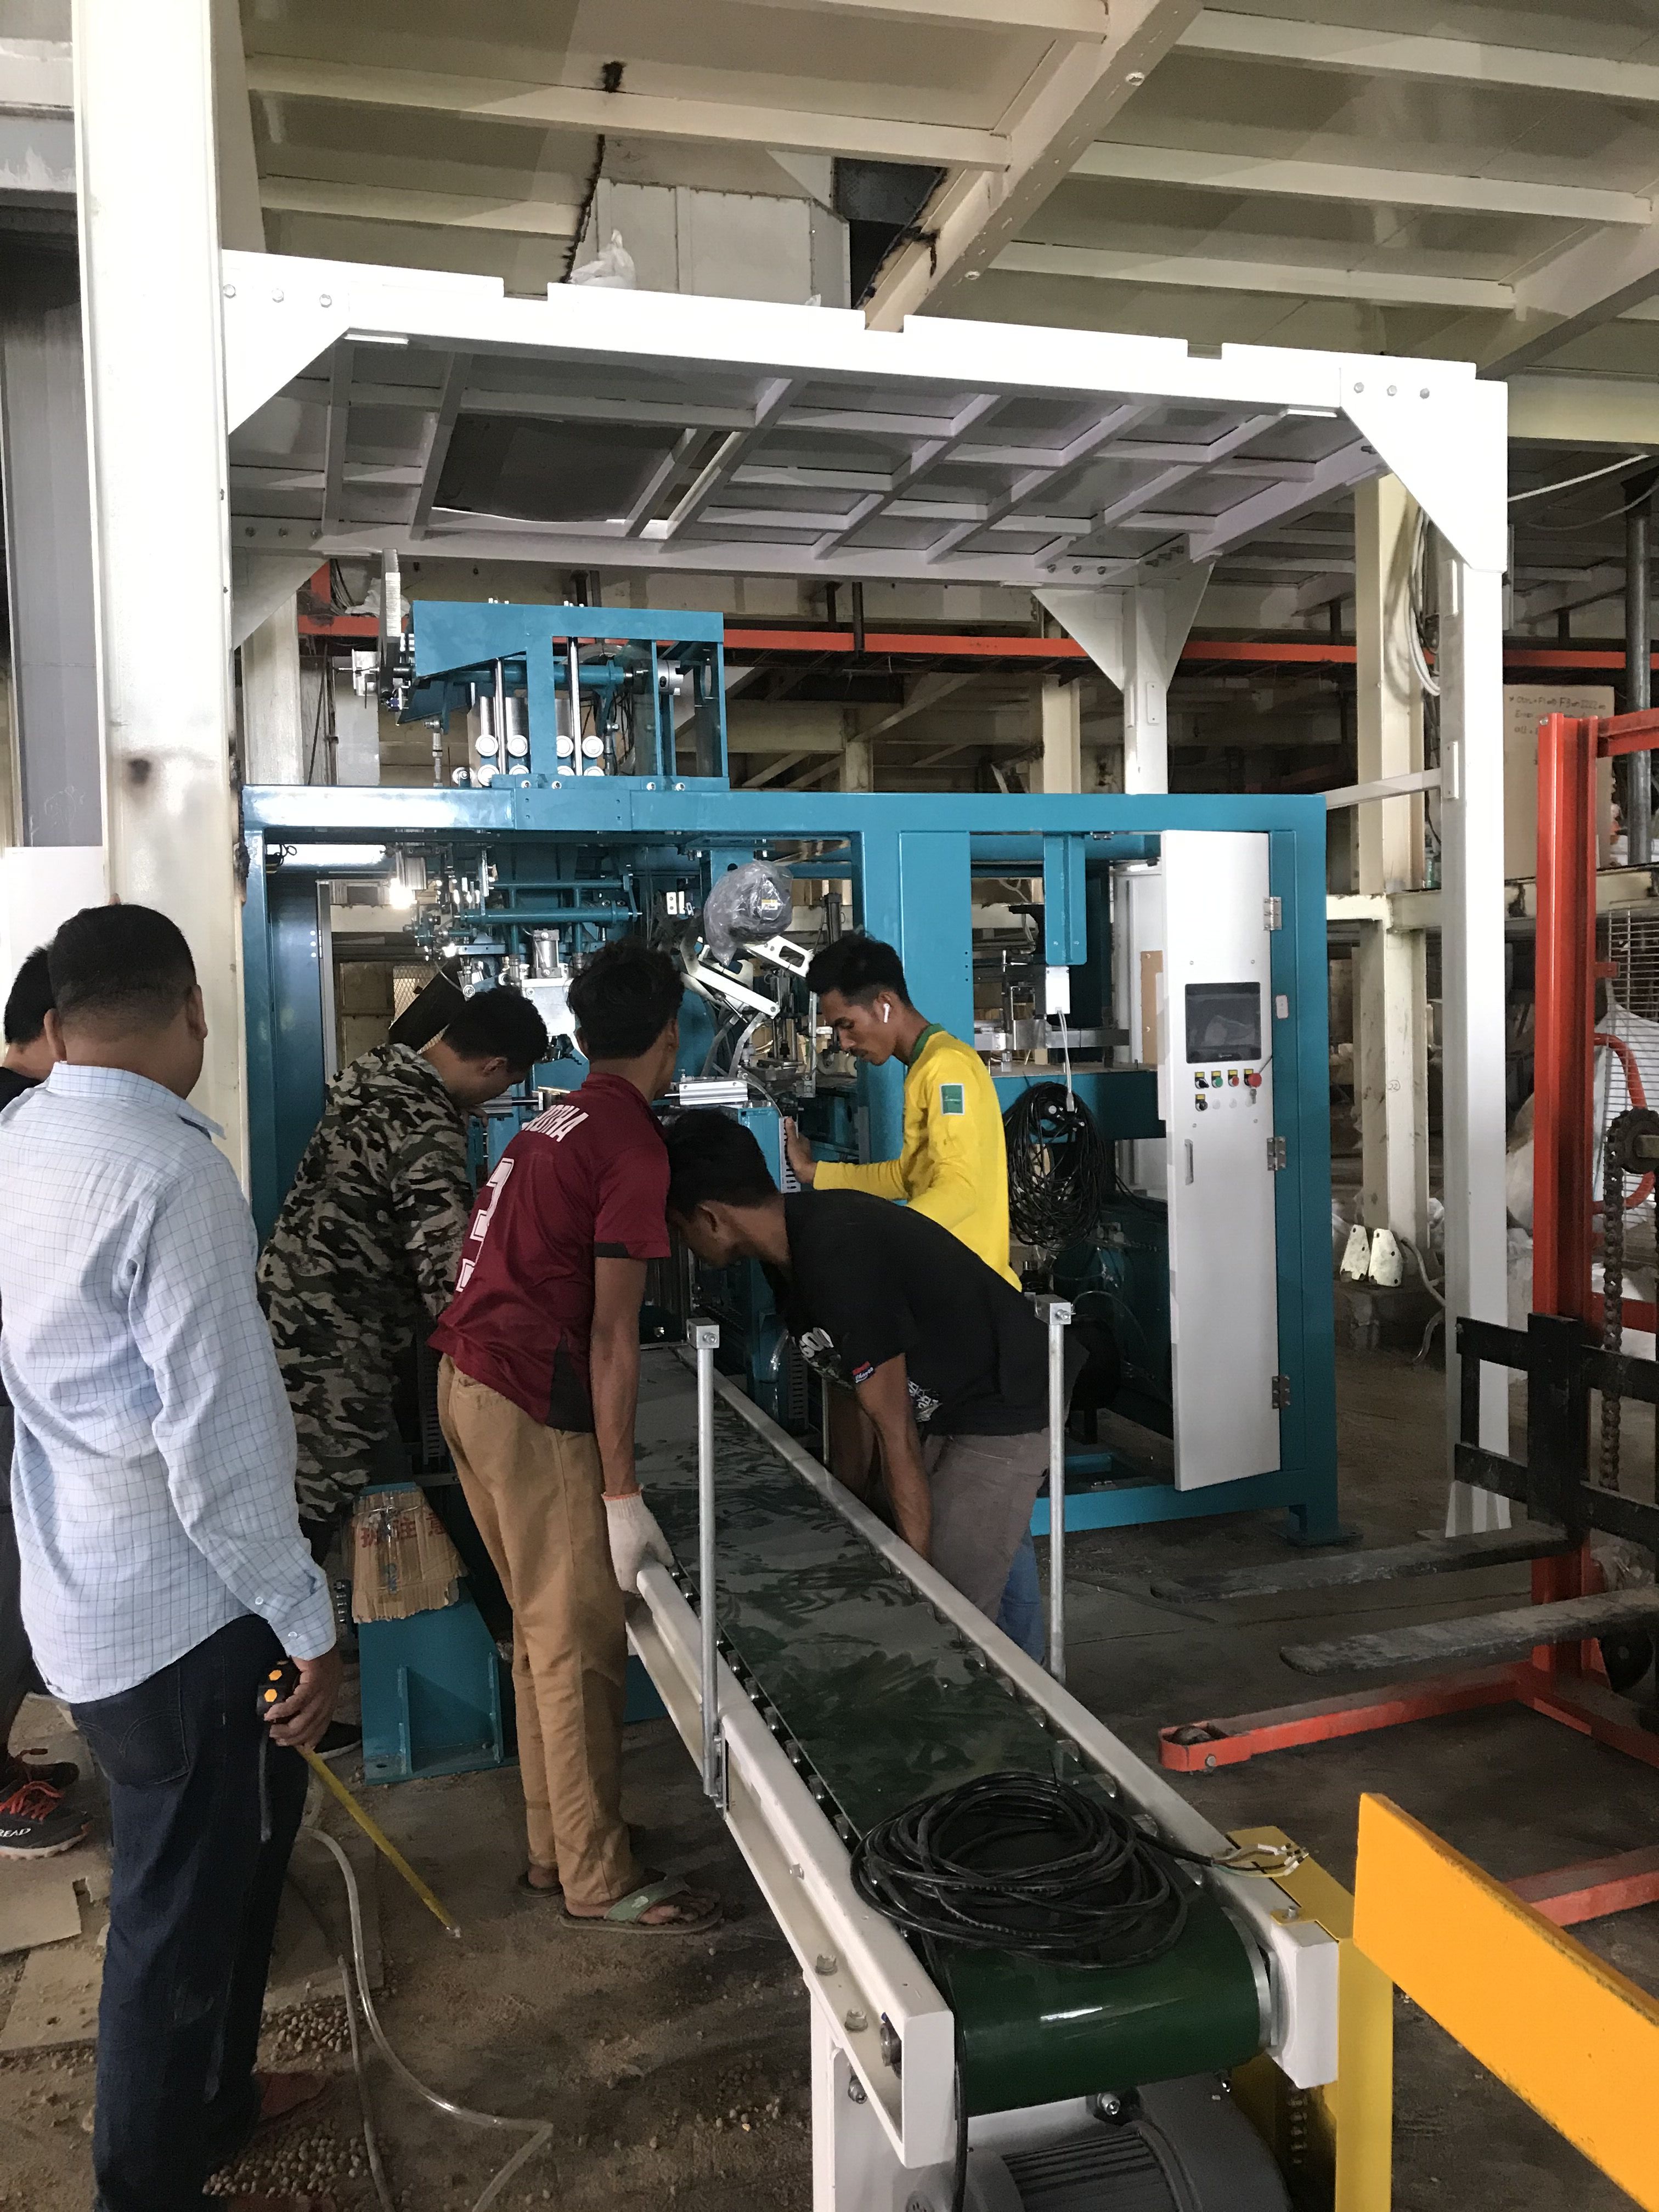 Ammonium Nitrate bagging machine Automated Bagging Line Fully Automatic Packing Palletizing Line, Fully Automatic Packing Line, Fully Automatic Bagging Line, Fully Automatic filling and packaging line